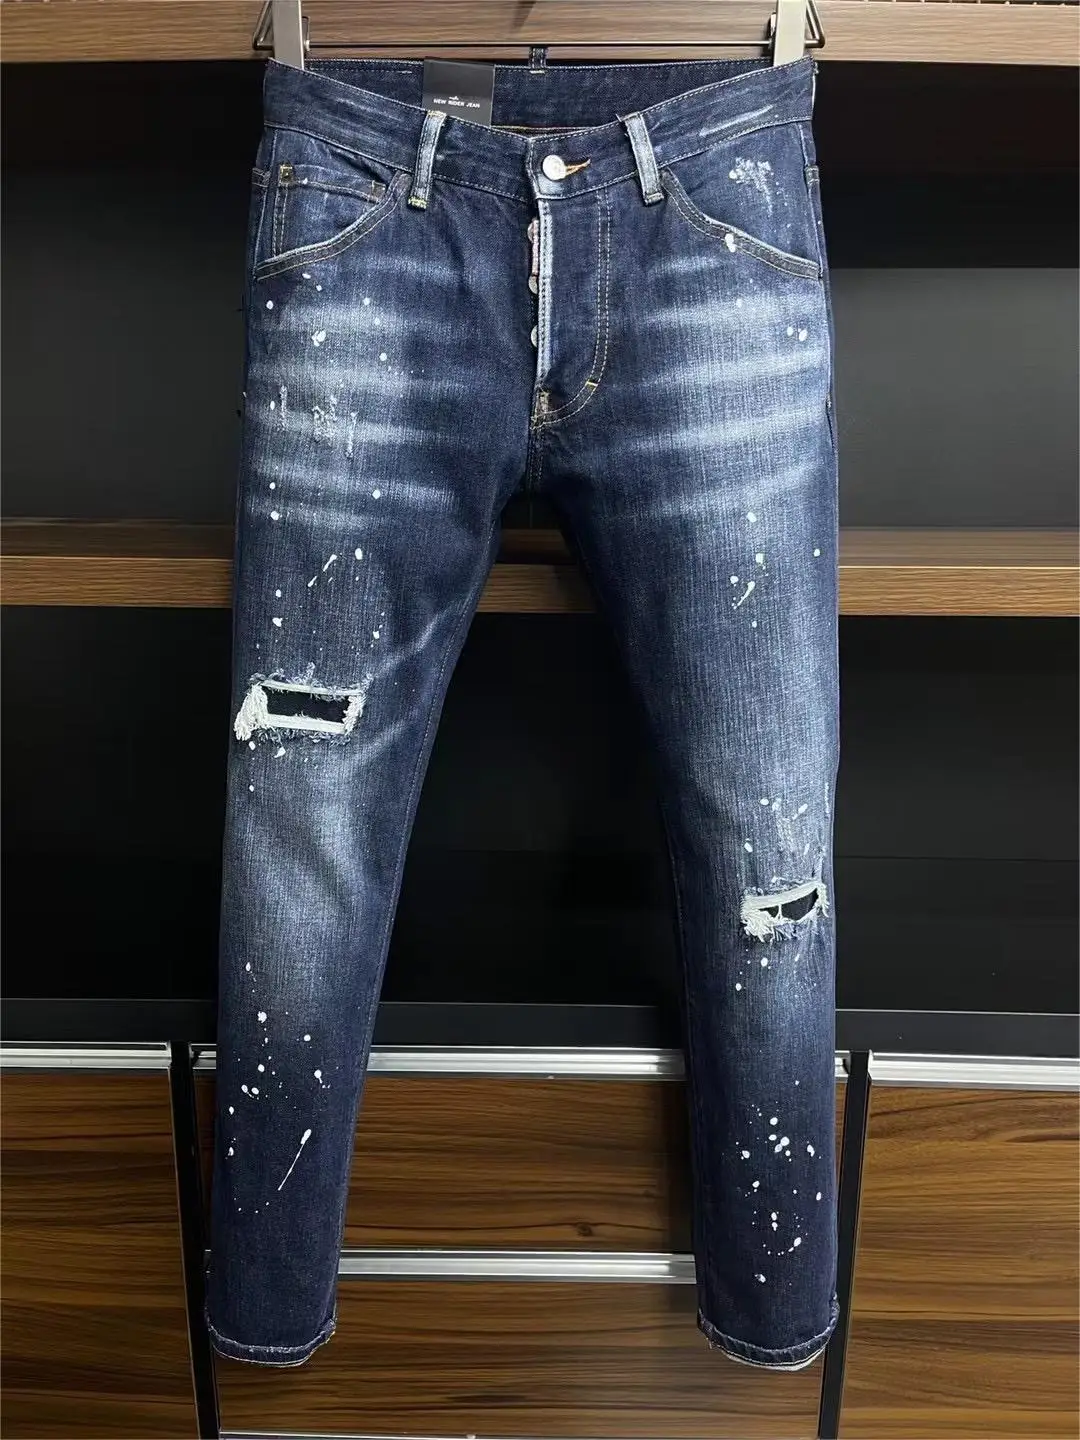 

2023 new fashion tide brand men's washing worn out torn paint locomotive jeans 9883